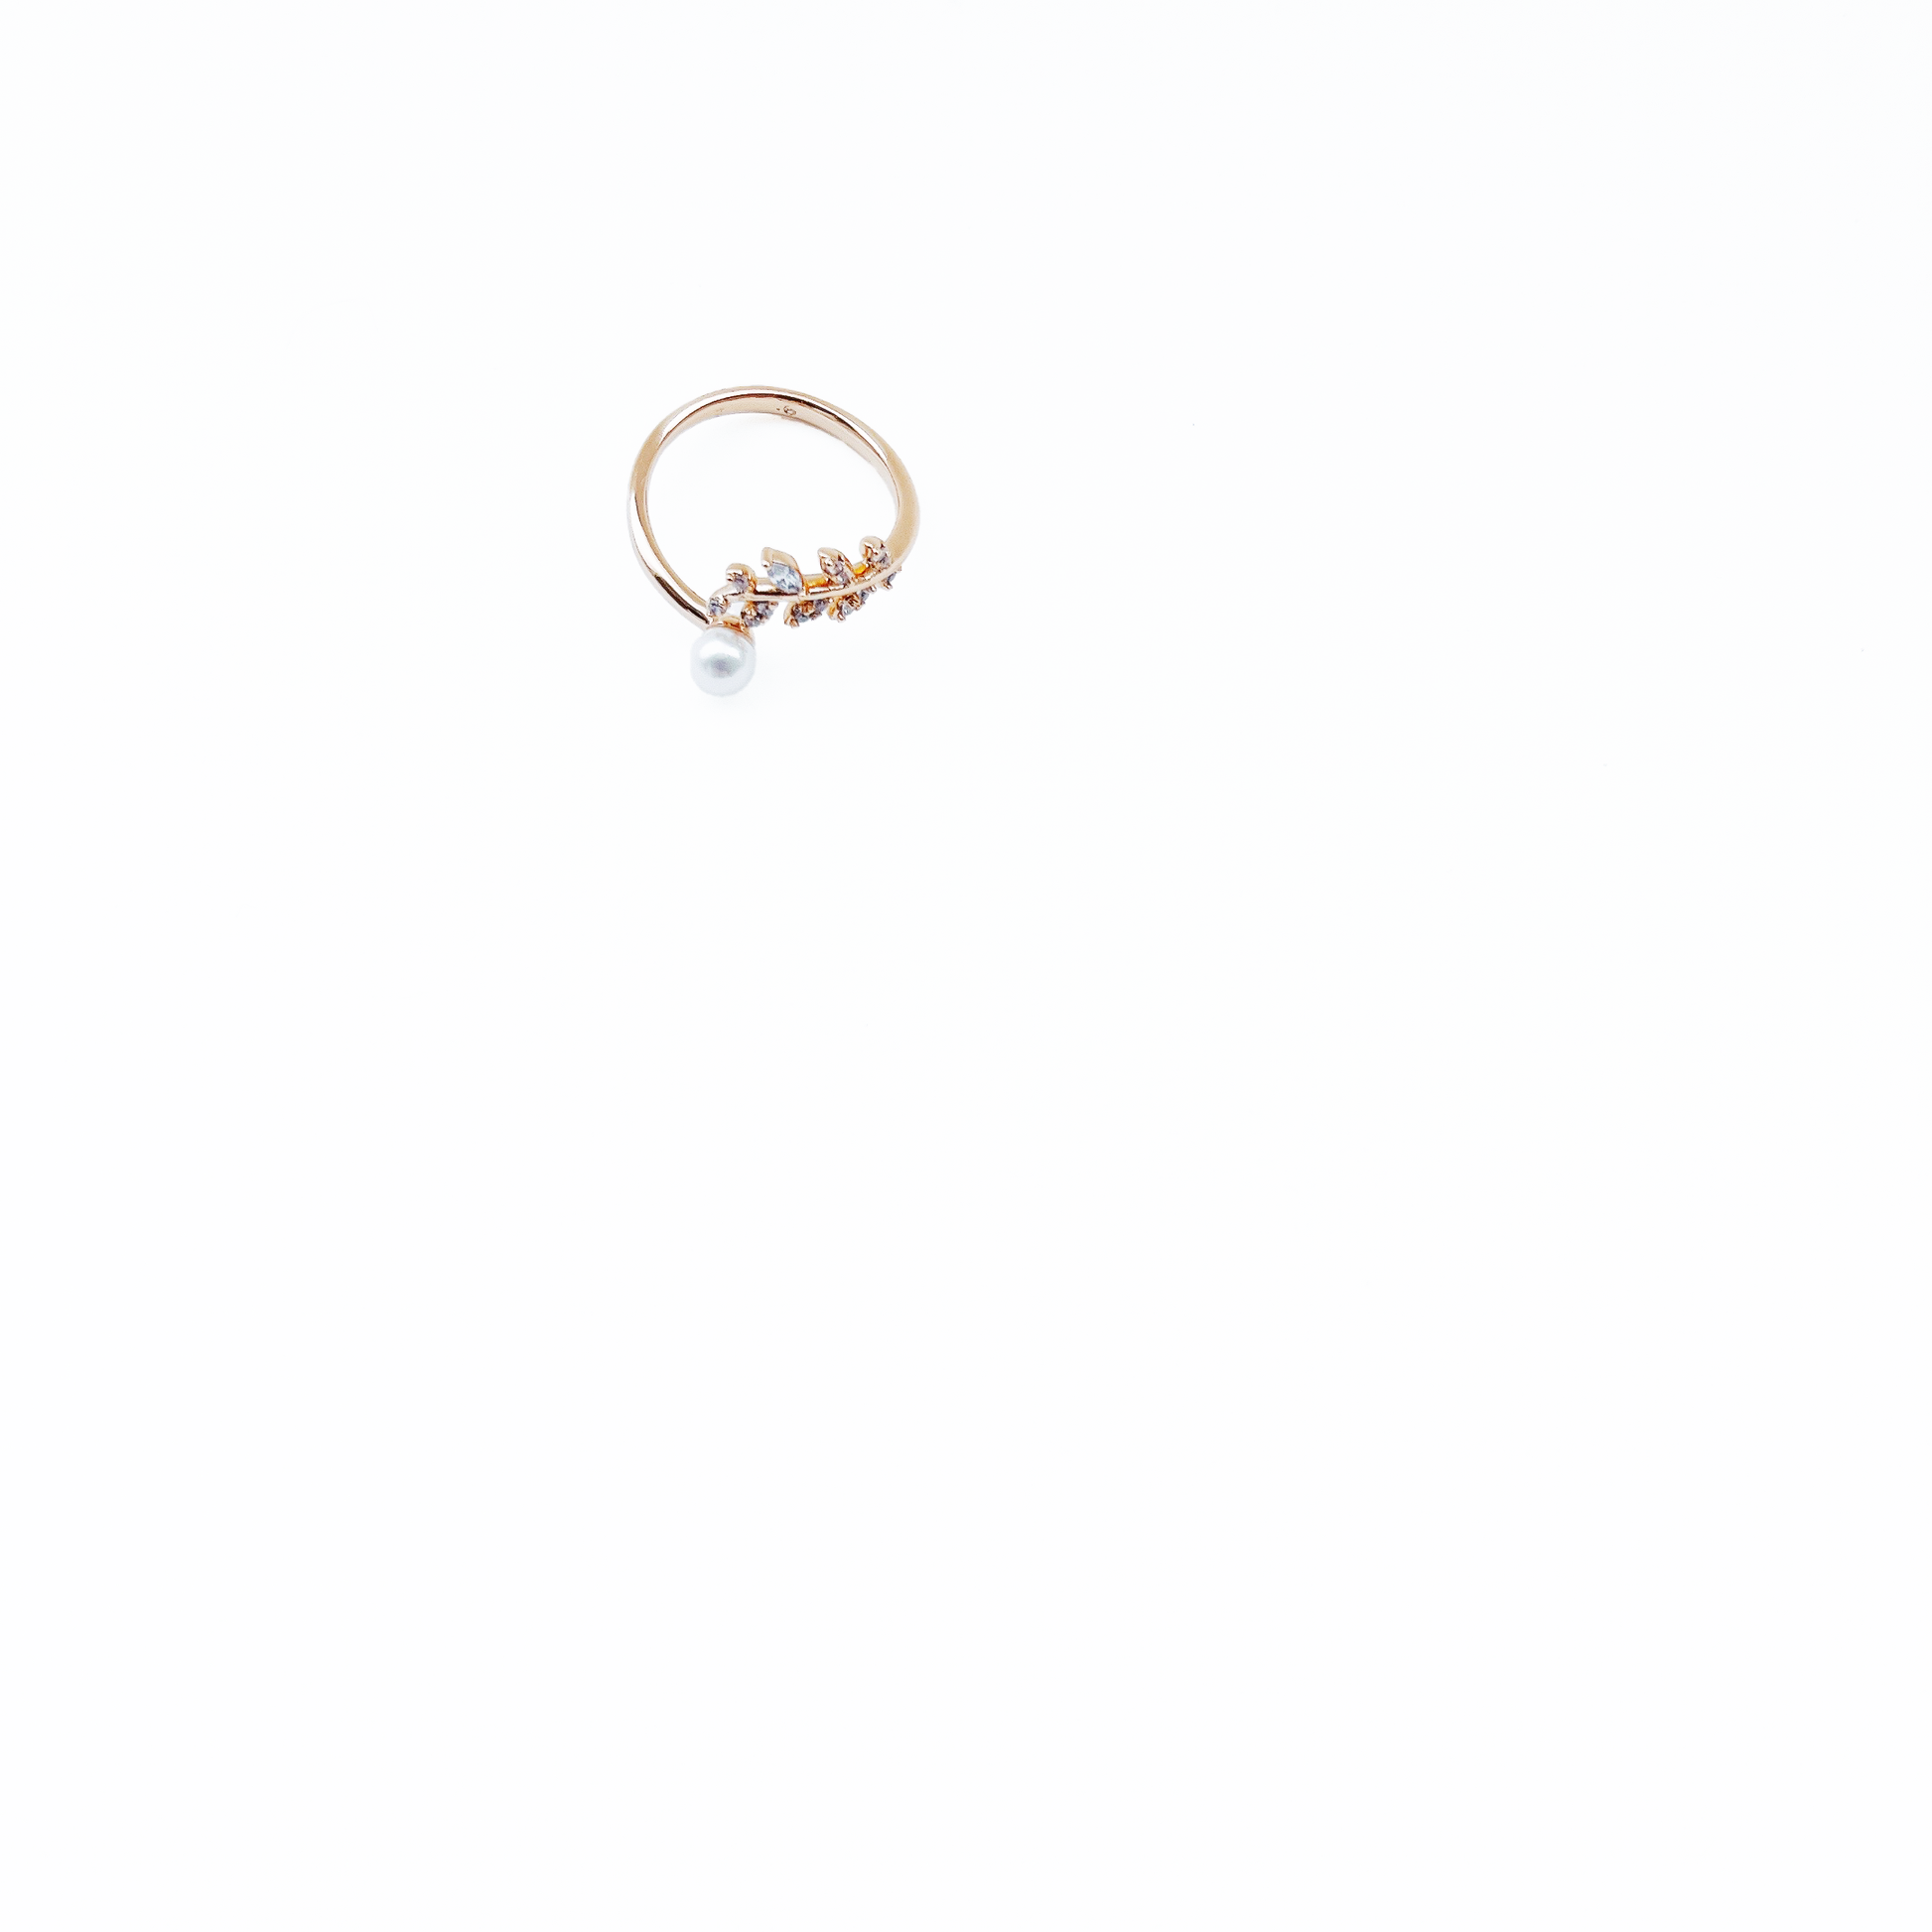 Elegant leaf ring in pink gold tone with dainty pearl and adjustable design by Hikaru Pearl